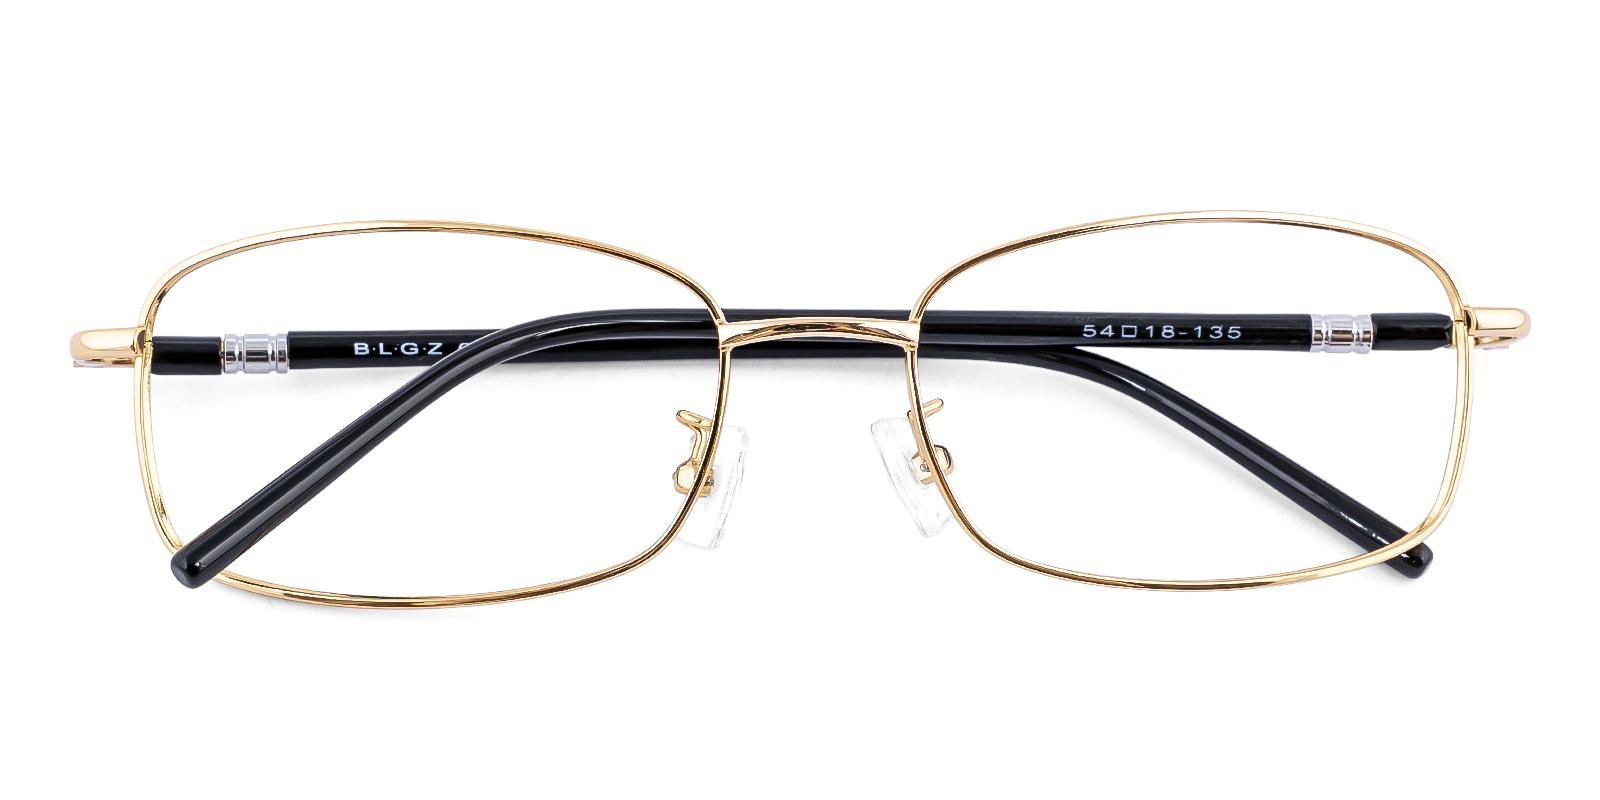 Finesome Gold Acetate , Metal Eyeglasses , SpringHinges , NosePads Frames from ABBE Glasses